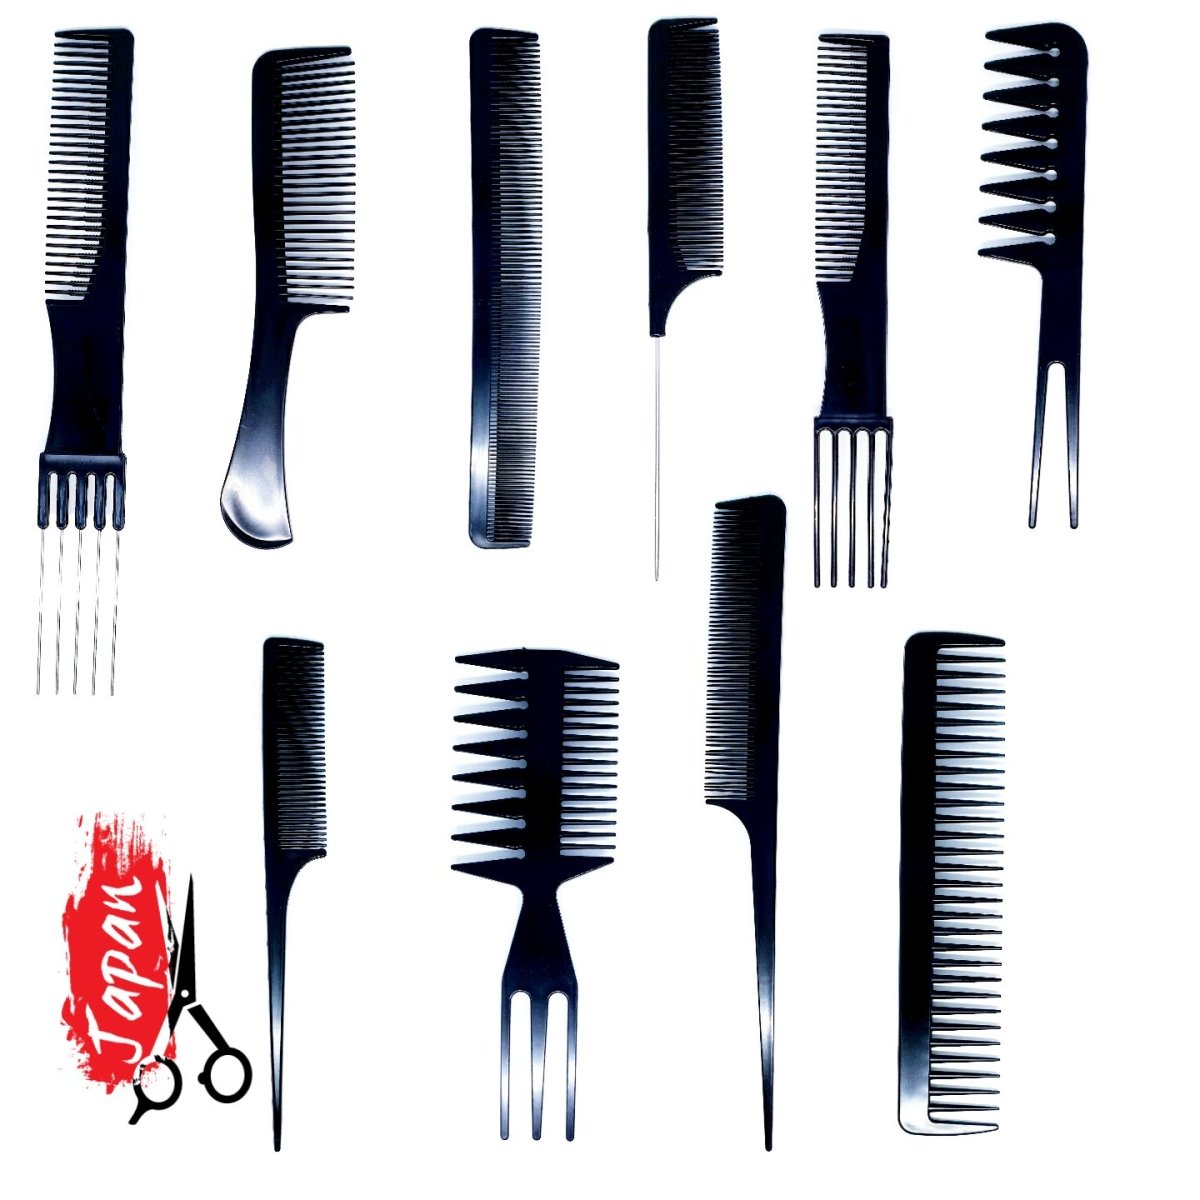 10 Piece Anti-Static Comb Set For Hairstyling & Hairdressing - Japan Scissors USA